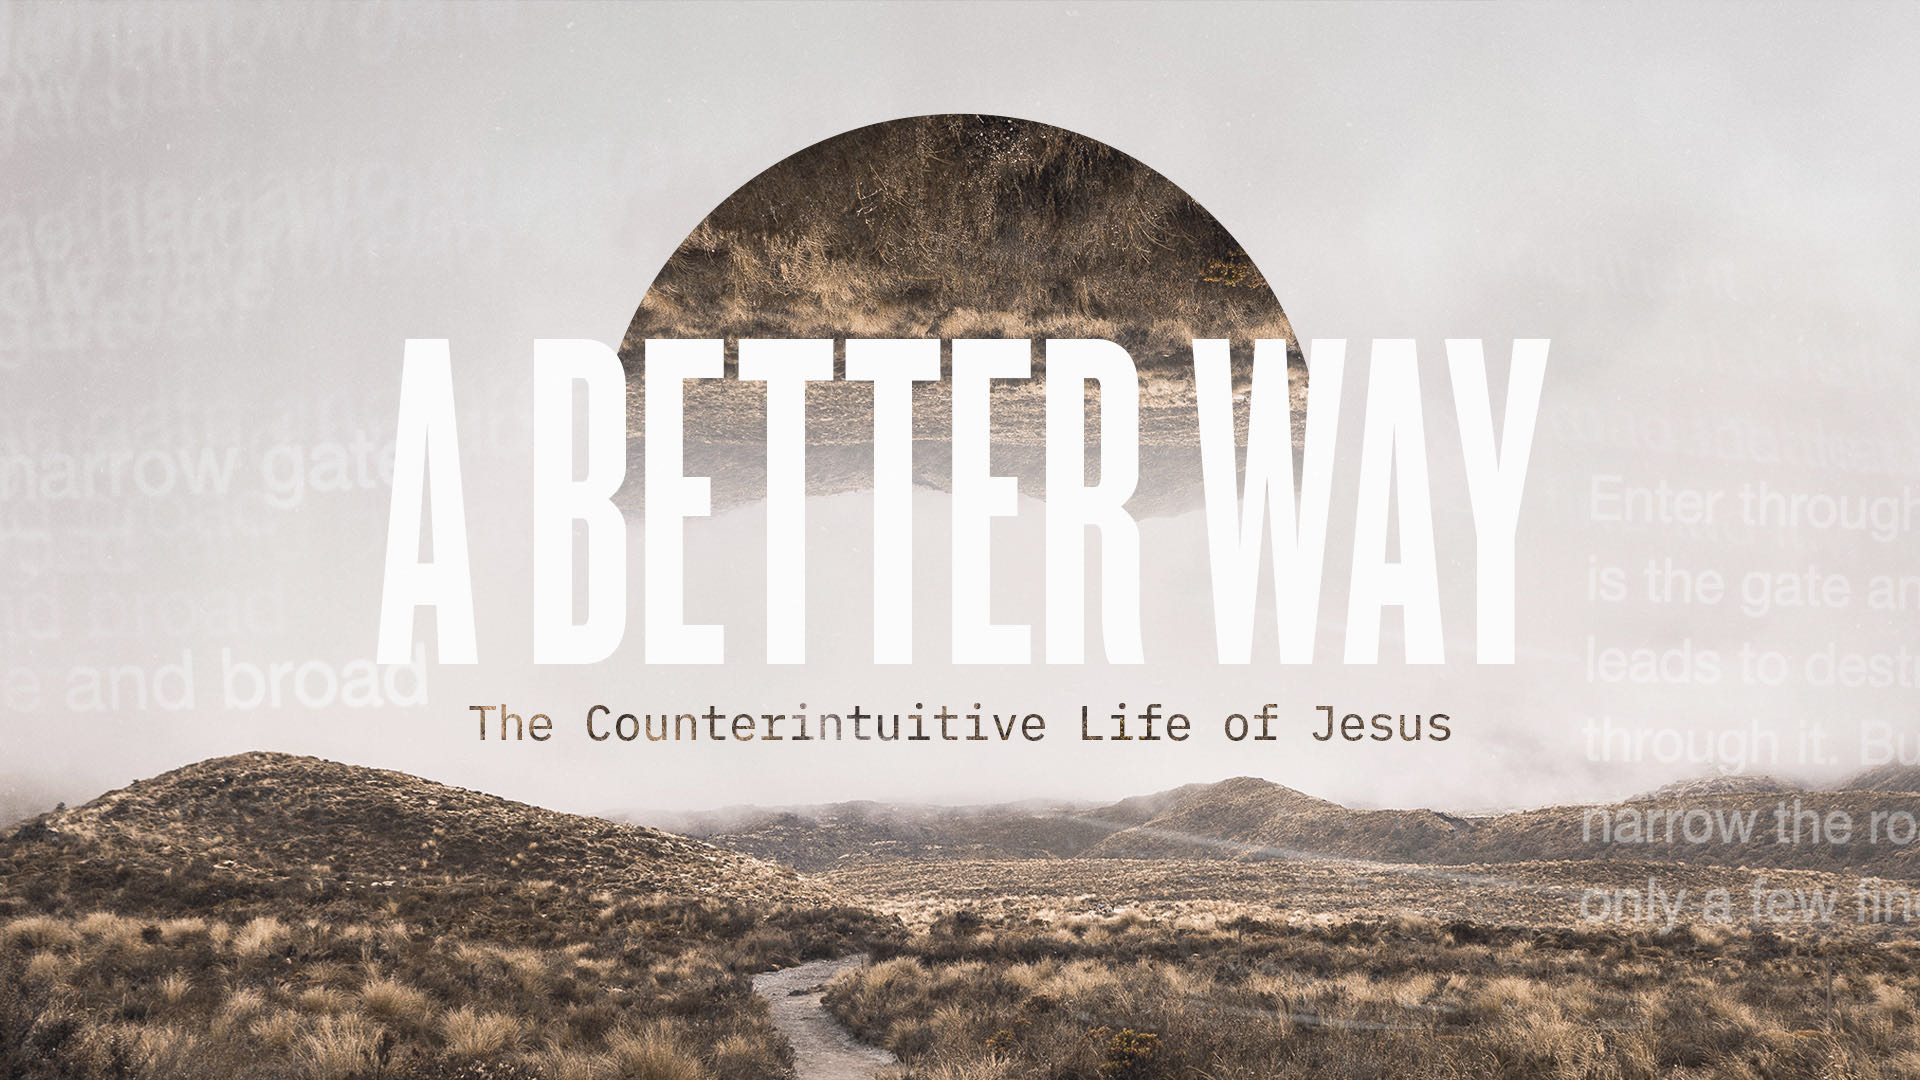 A Better Way: The Counterintuitive Life of Jesus